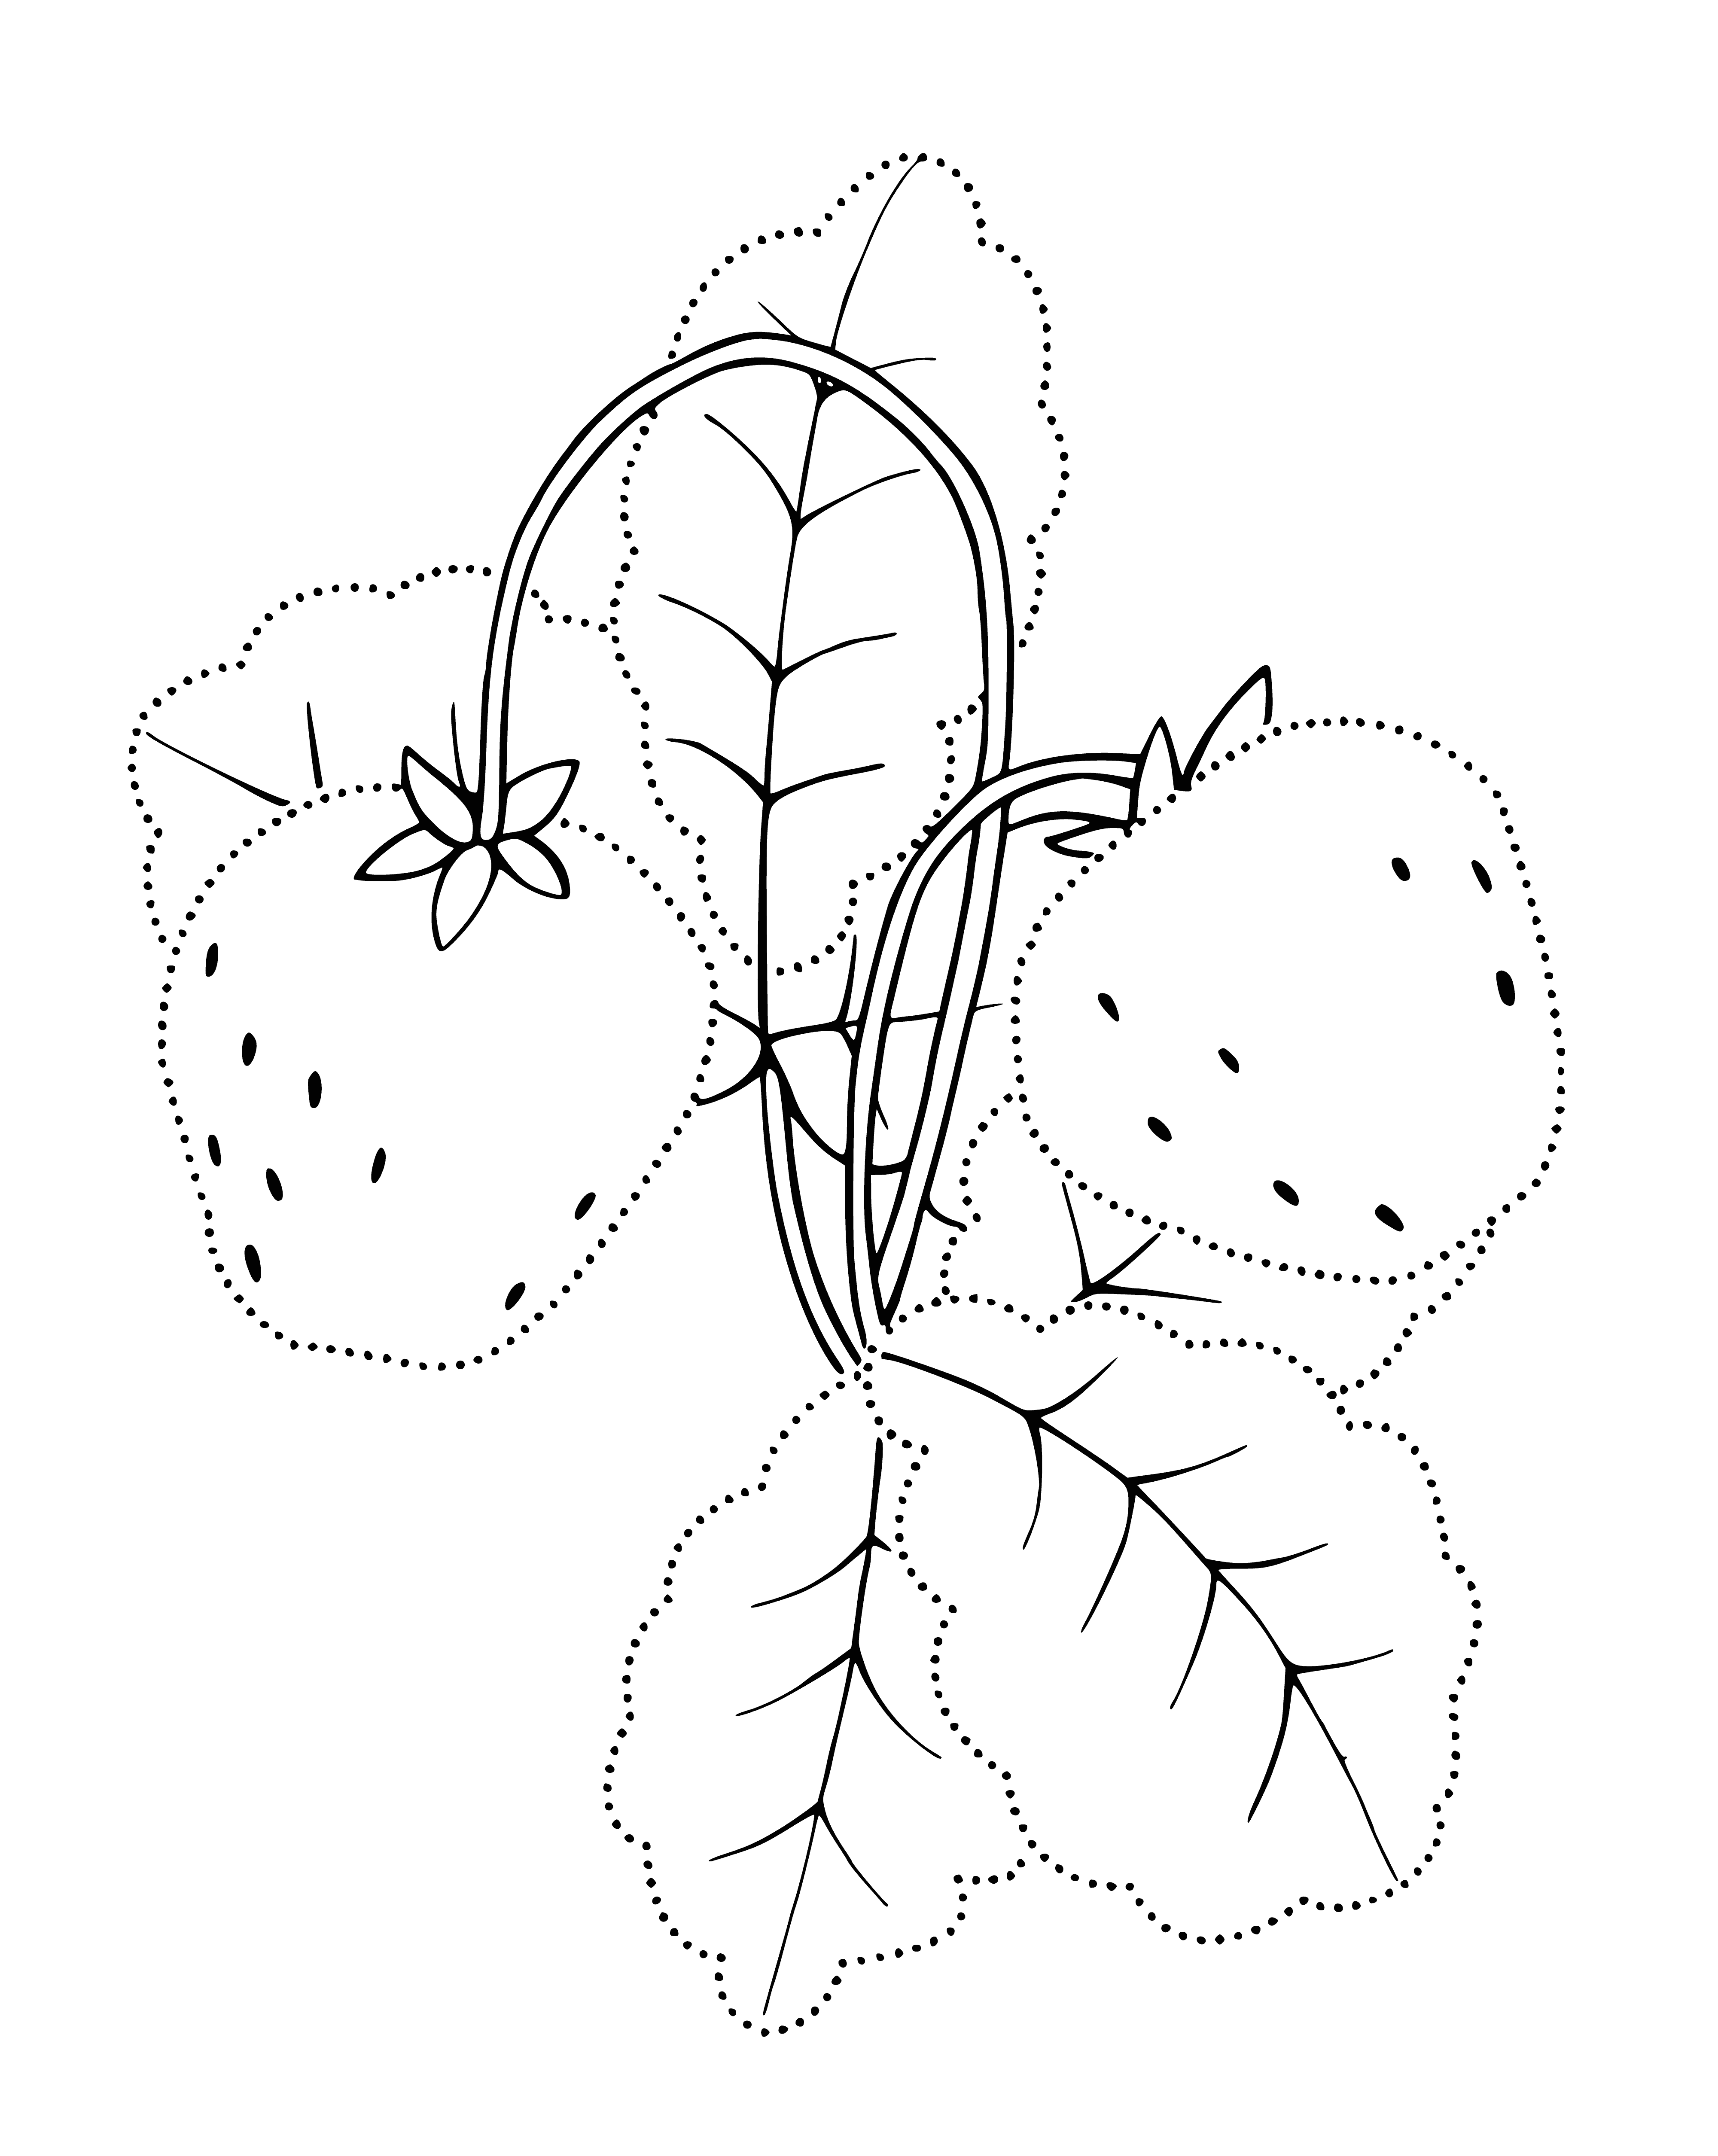 coloring page: A bowl of red, juicy strawberries with a white tip, sweet and ripe.